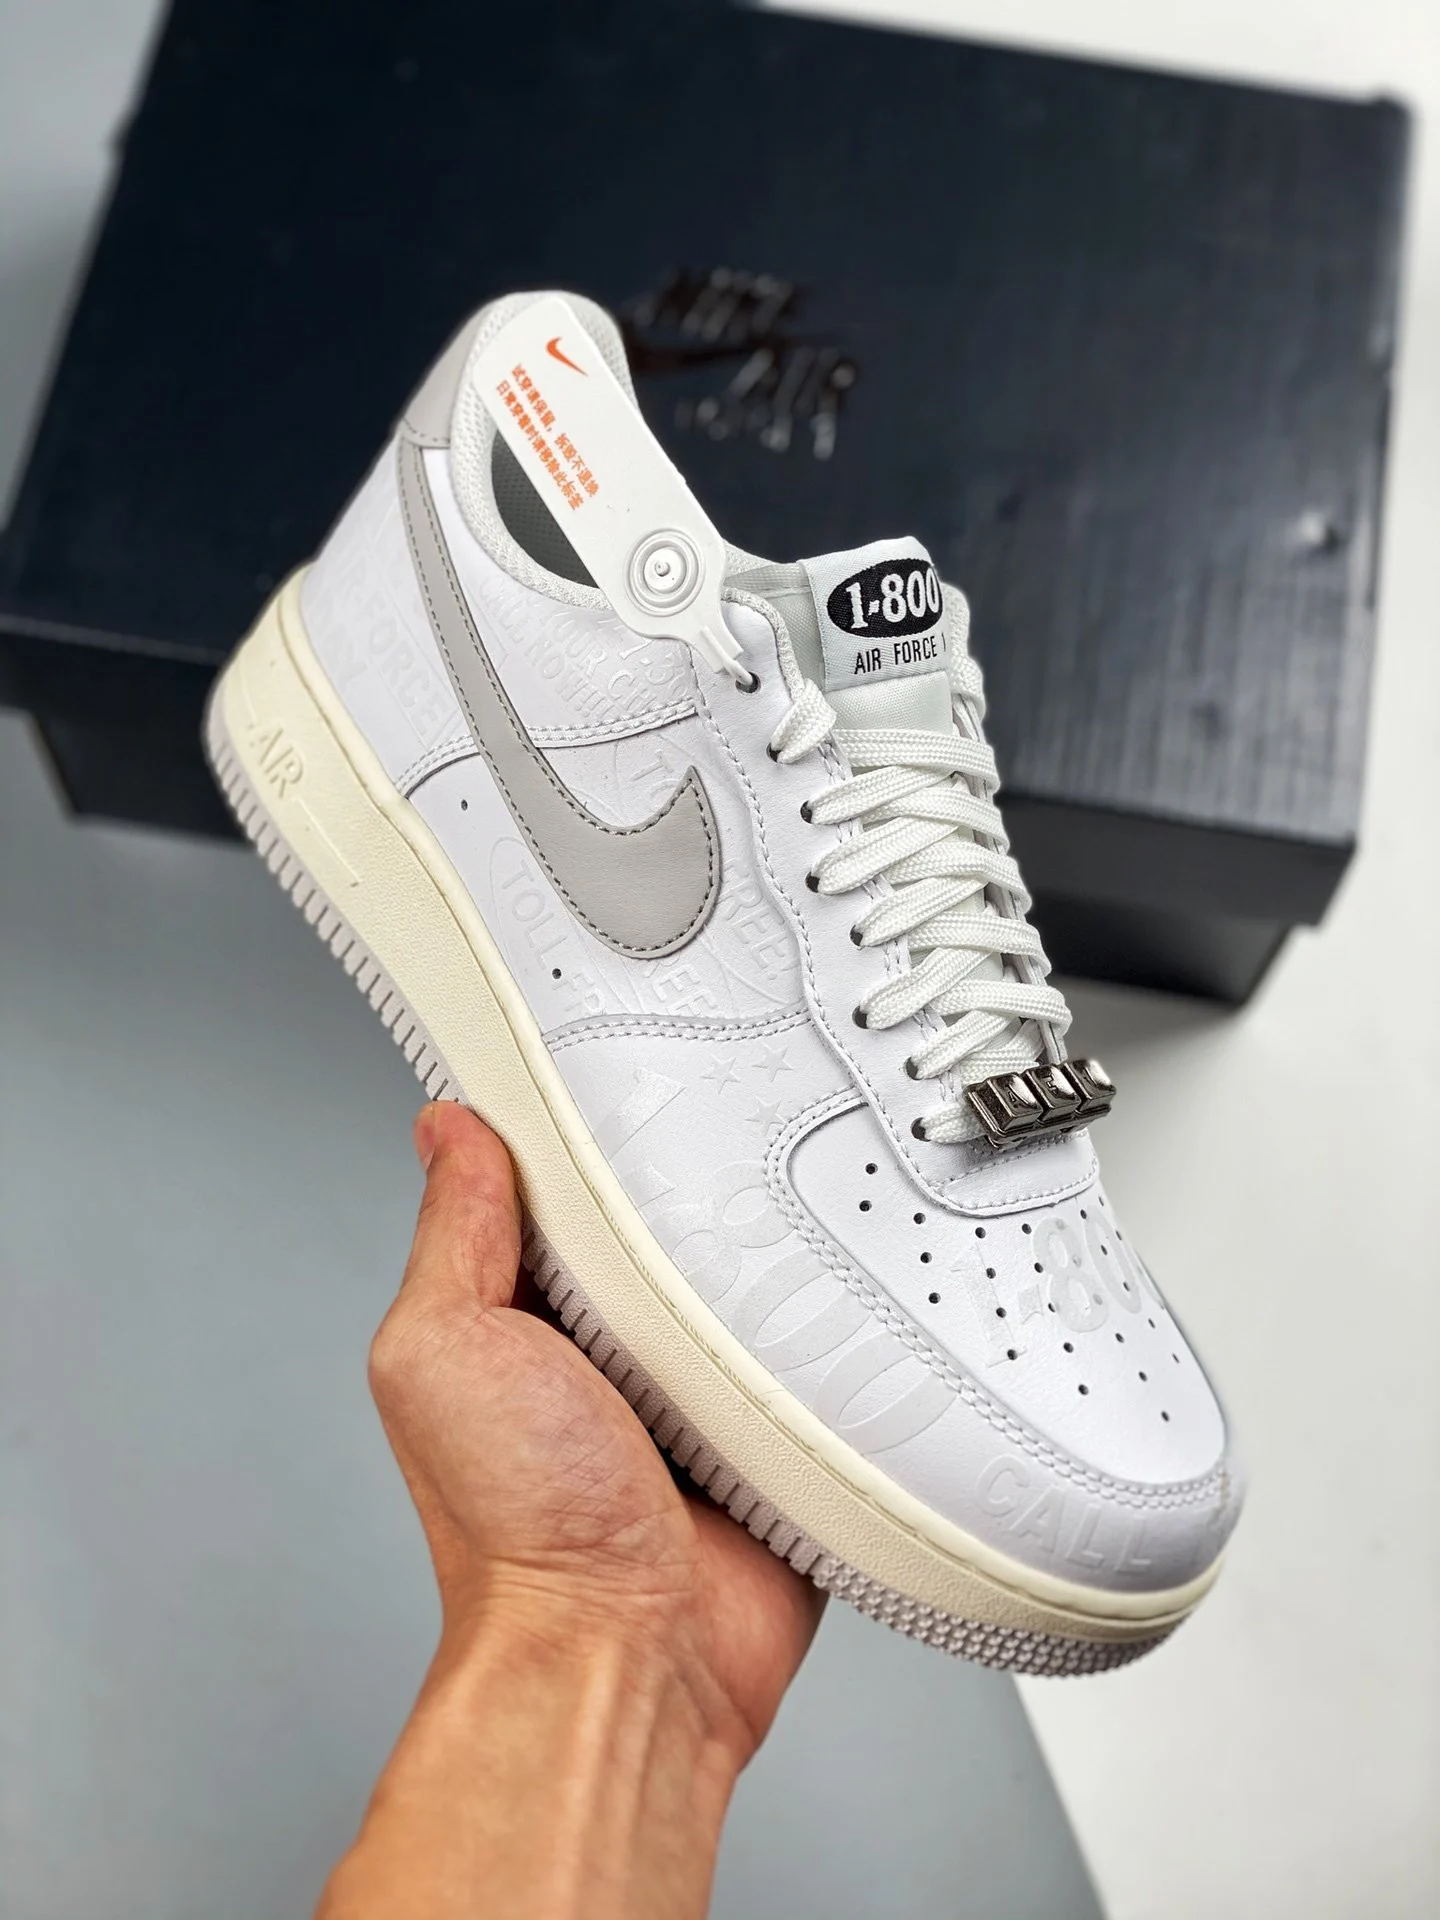 Nike Air Force 1 Low 1-800 White Vast Grey-Sail-Black For Sale